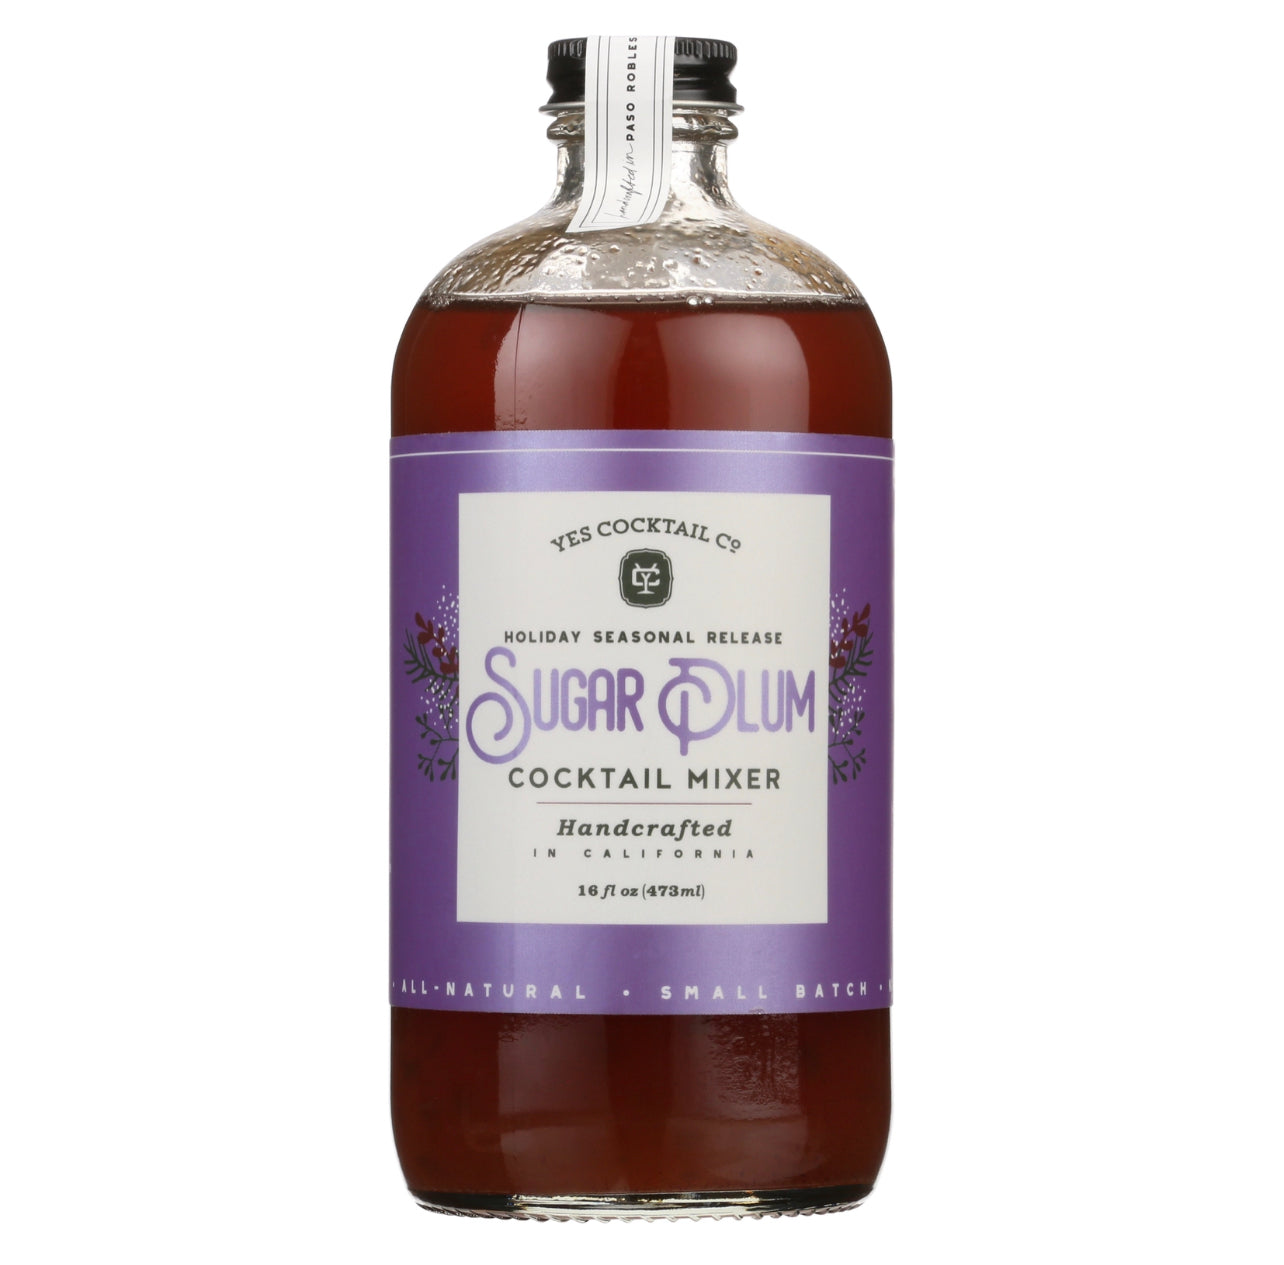 16 oz bottle of hand crafted Sugar Plum Cocktail Mixer made by Yes Cocktail Co